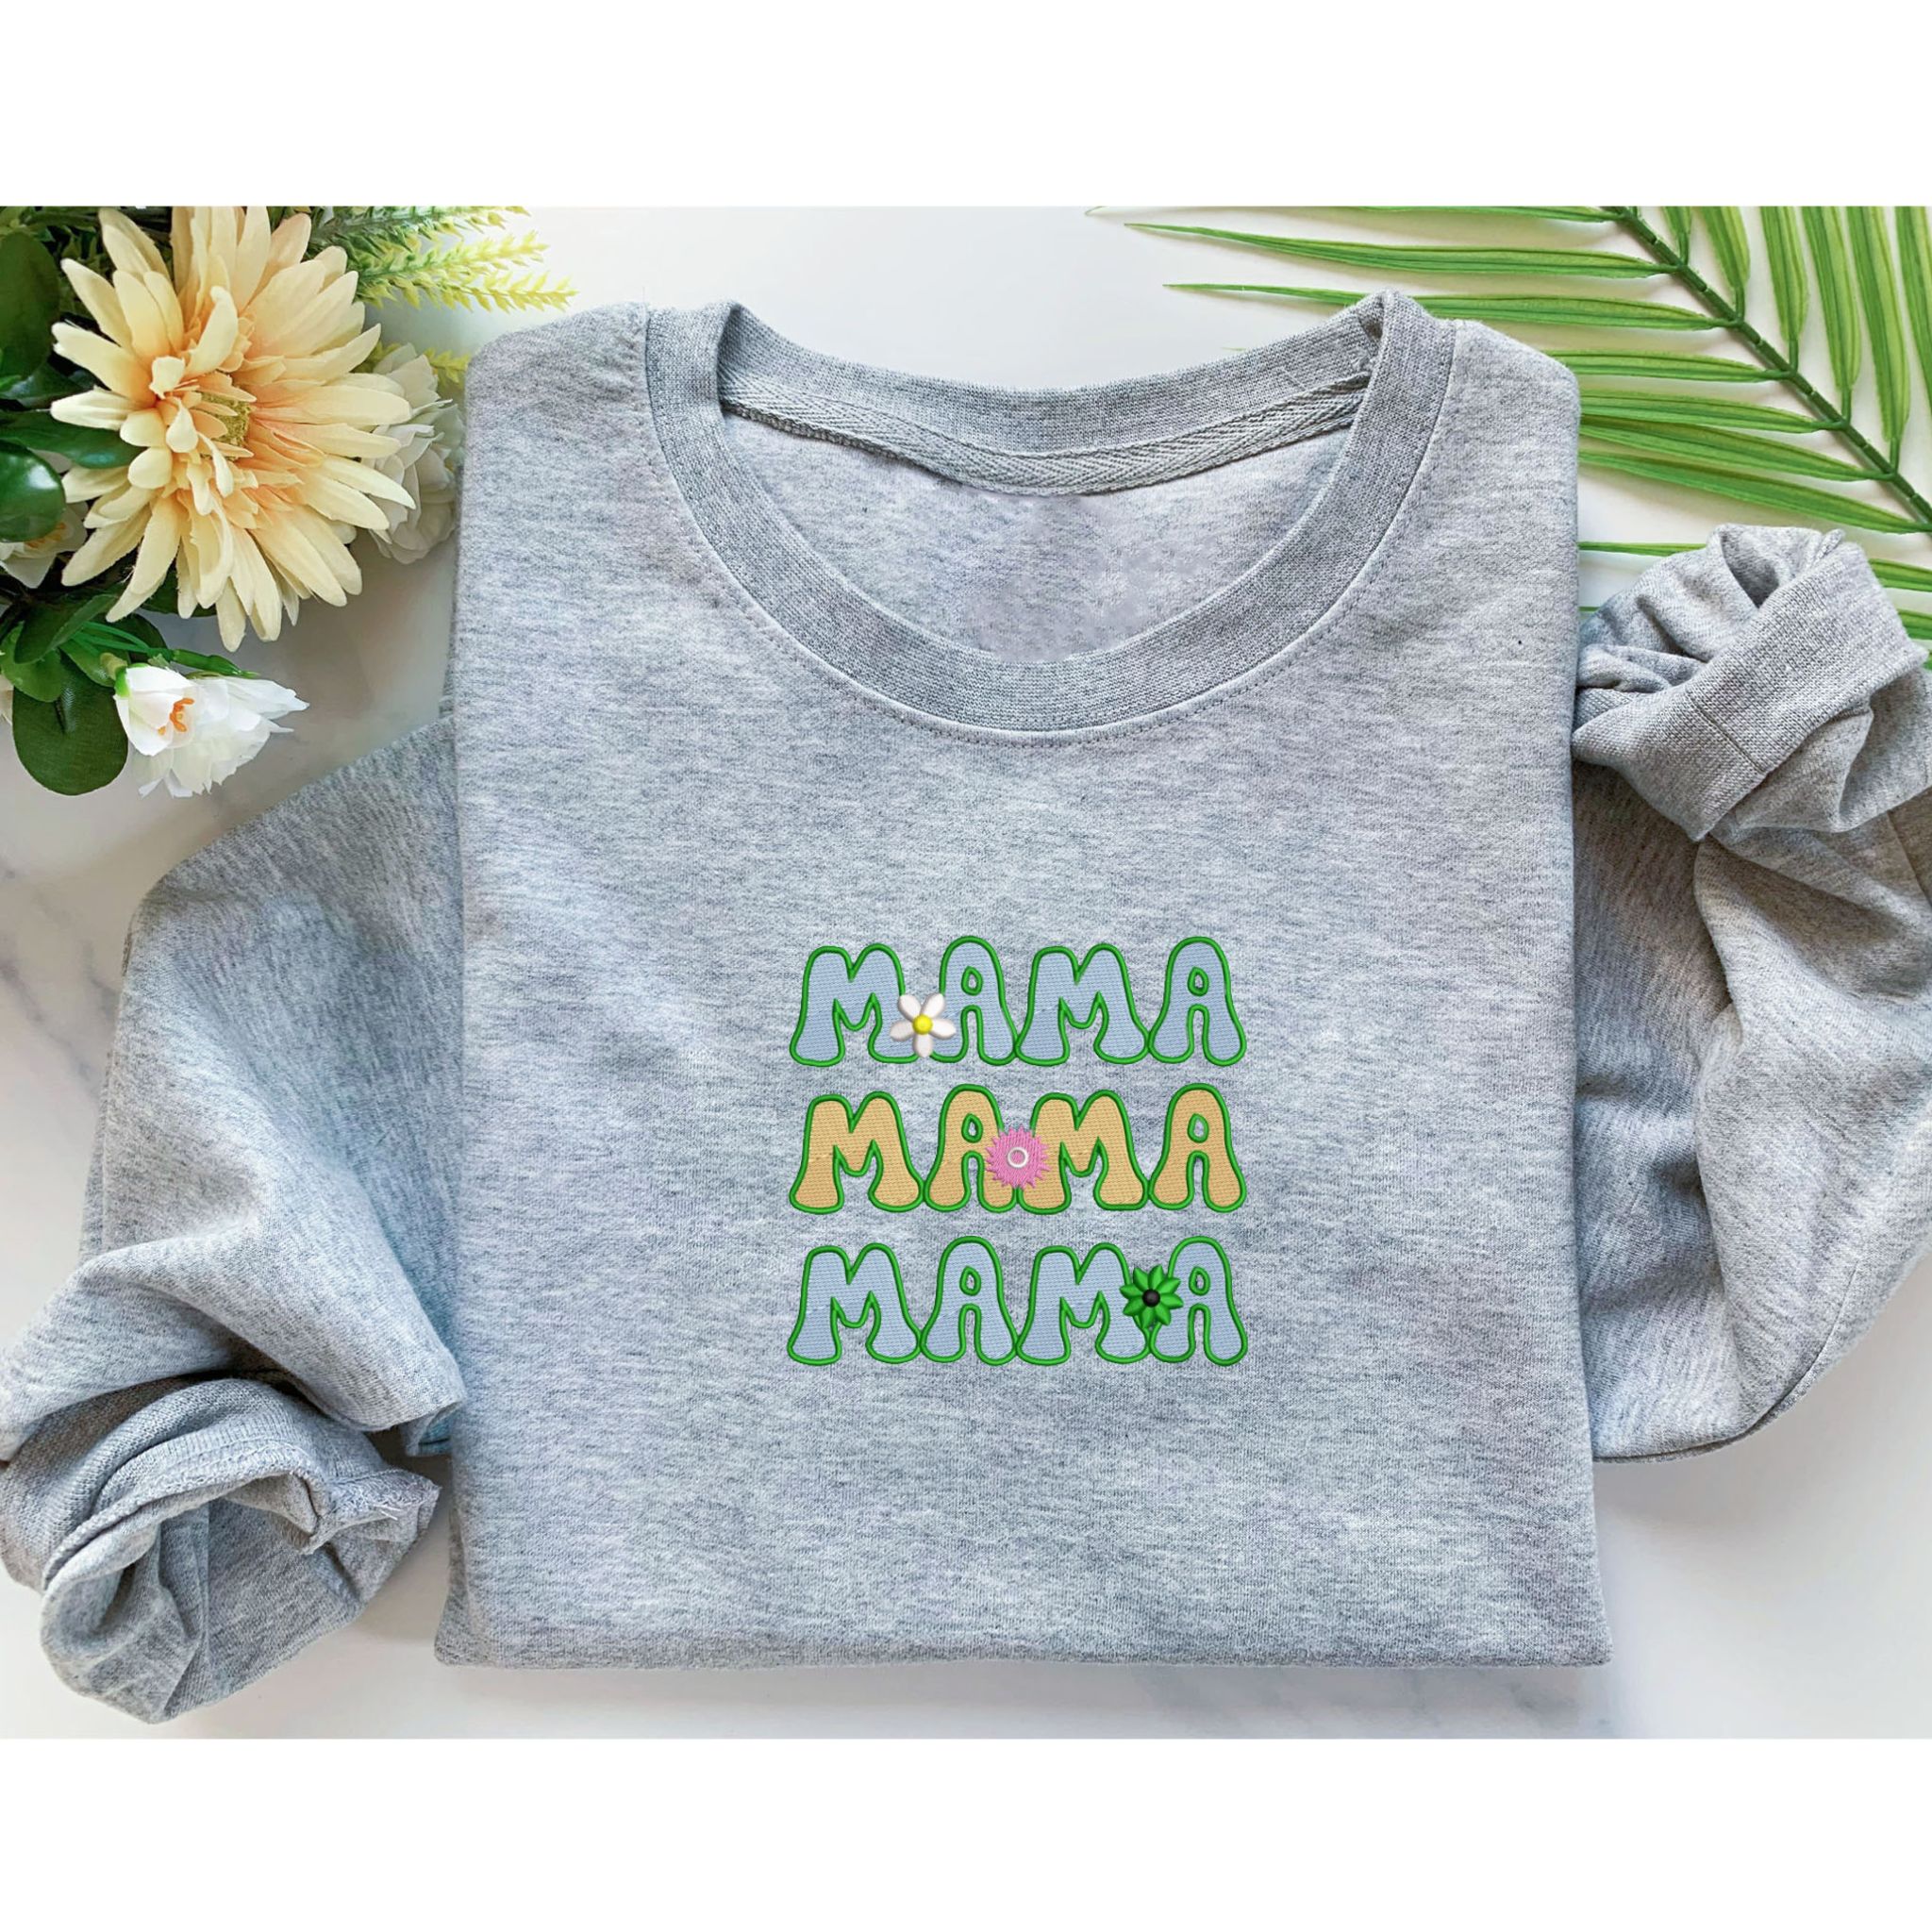 Customizable Floral Mama Sweatshirt, Embroidered Crewneck with Flower Letter, Mom Gifts Ideas Light Blue / M